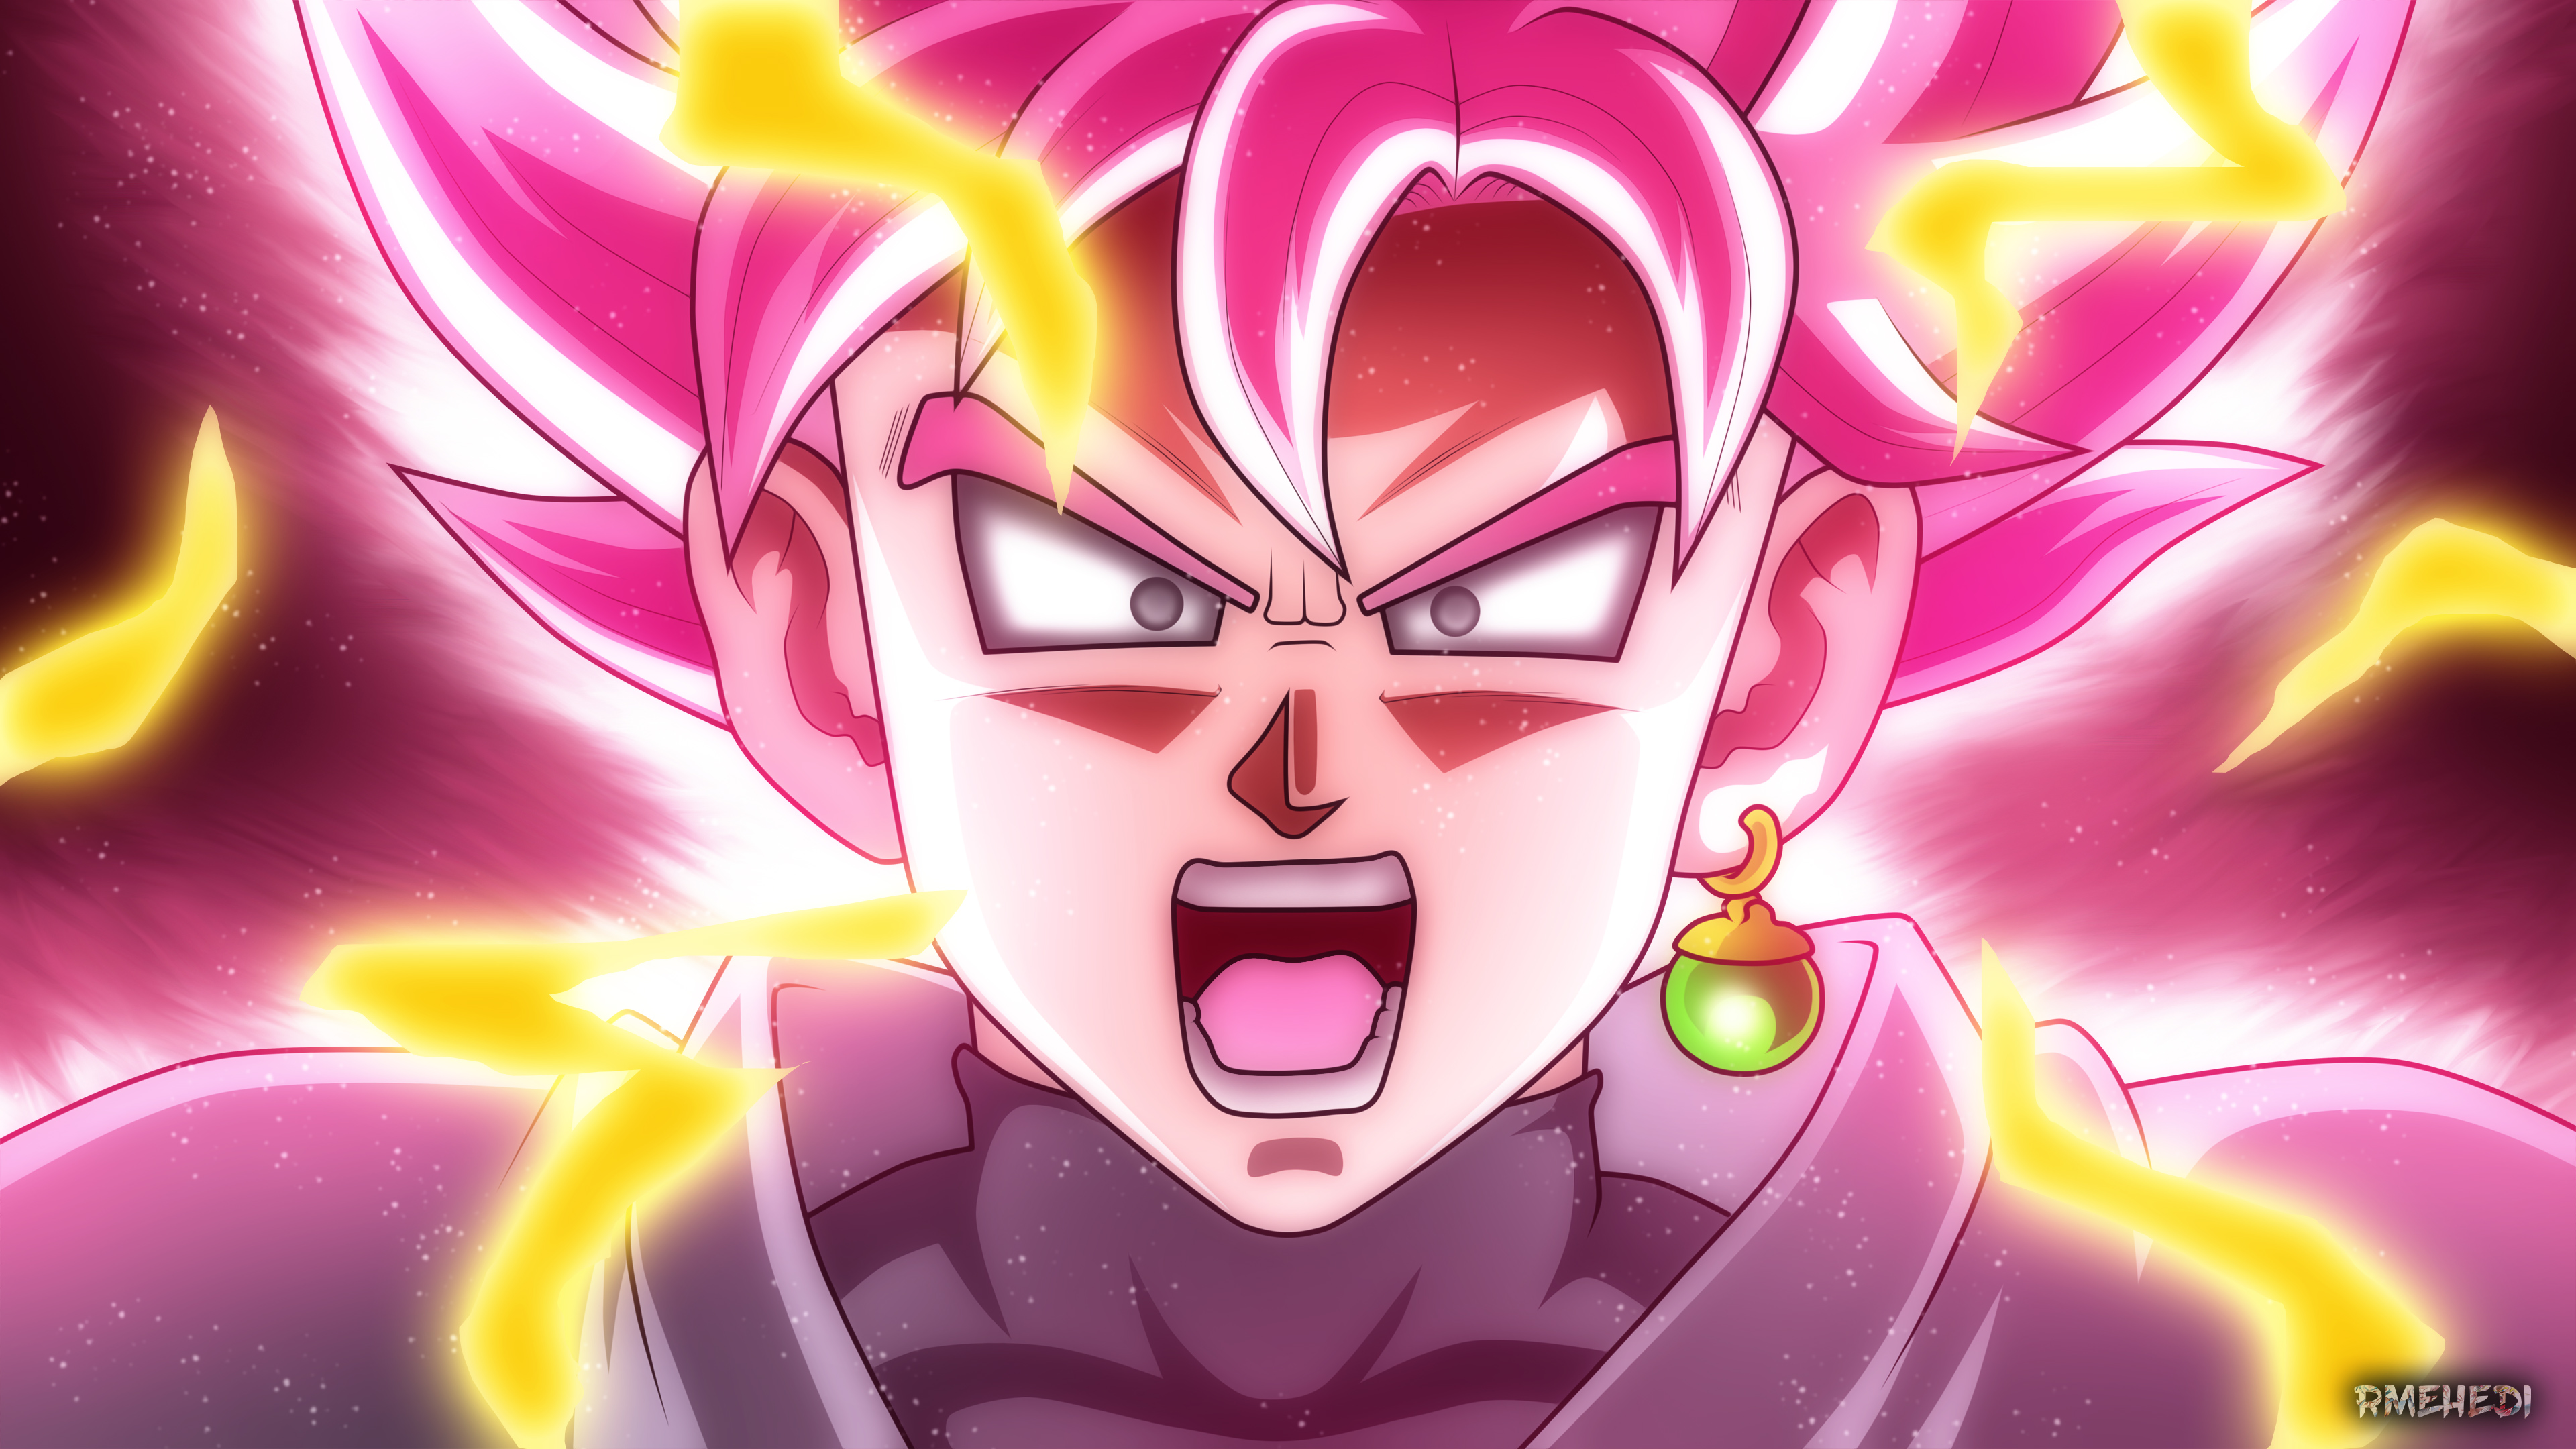 Super saiyan rose k hd anime k wallpapers images backgrounds photos and pictures